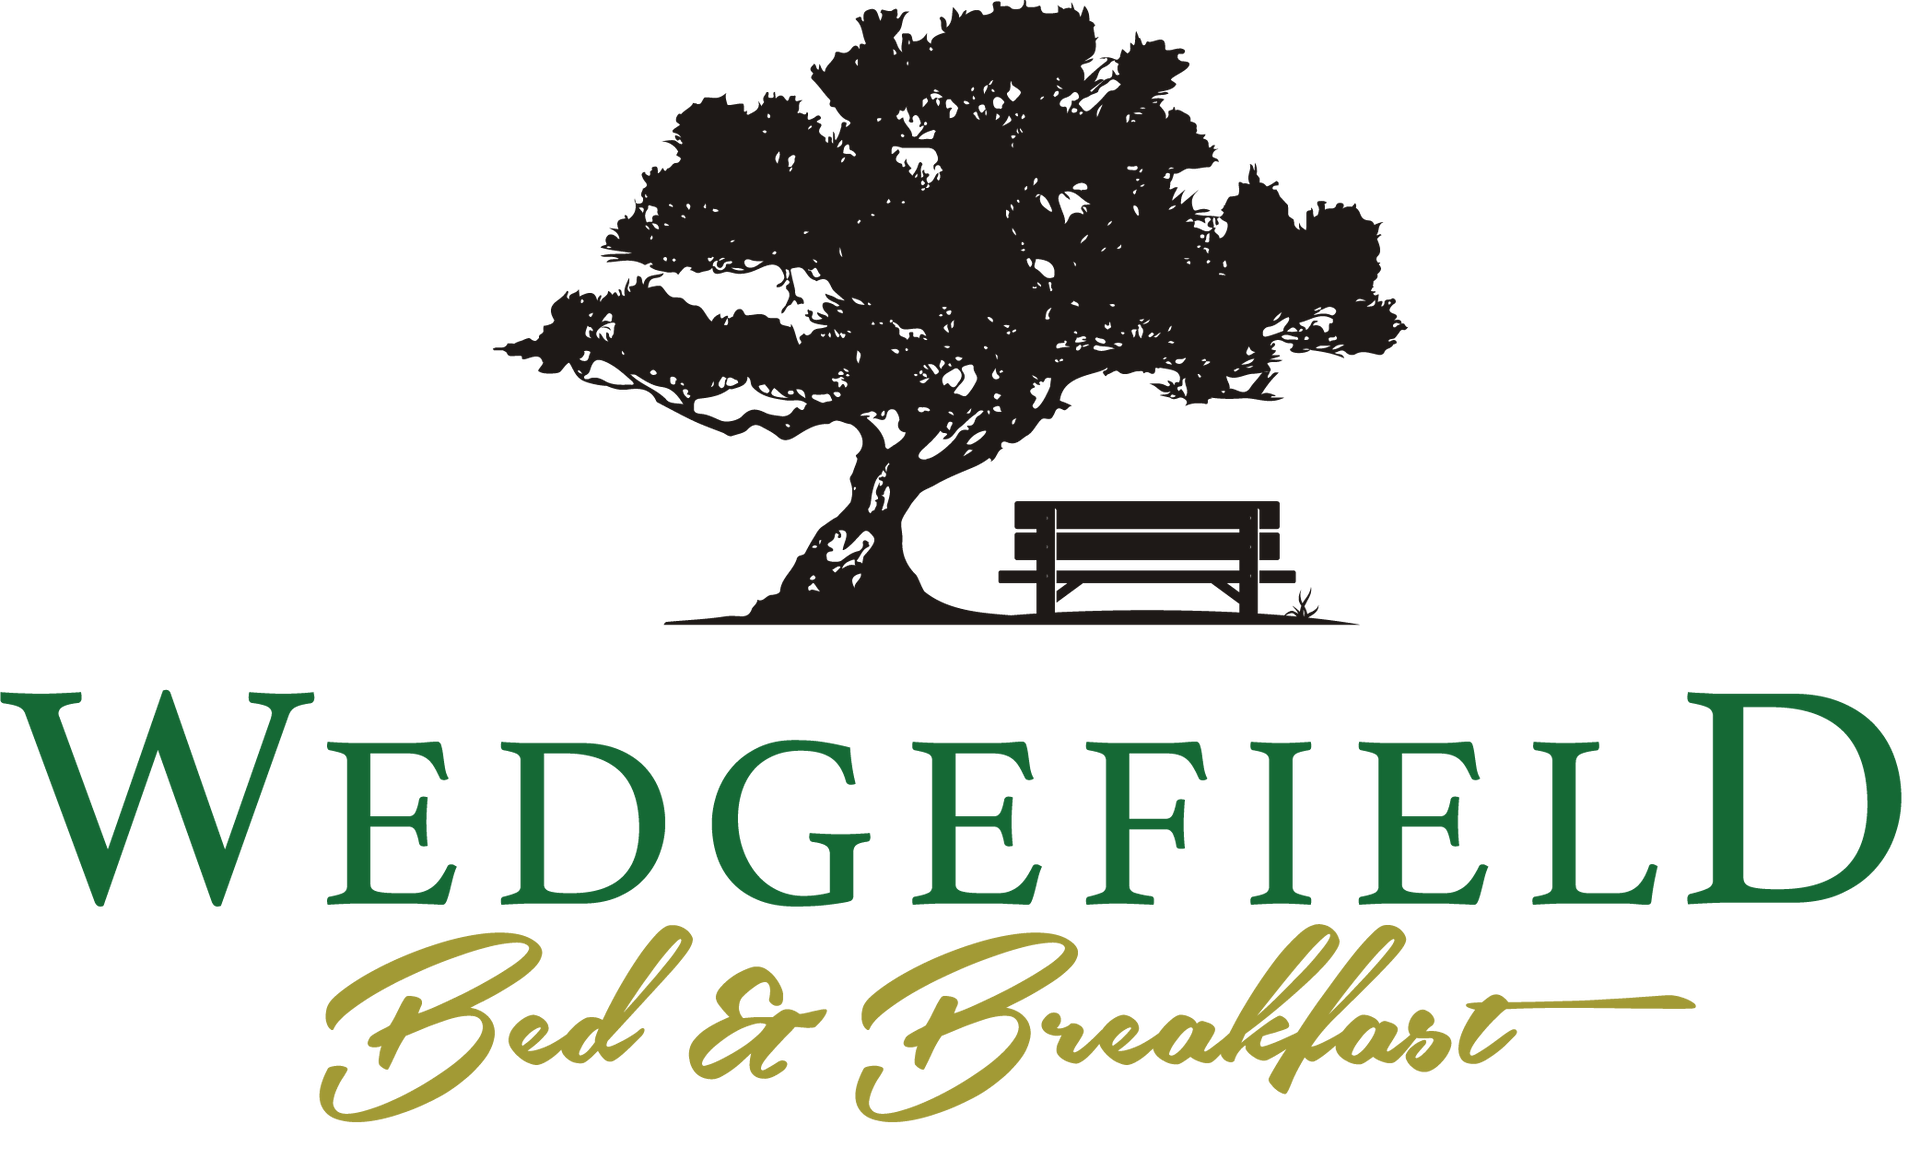 Wedgefield Bed and Breakfast